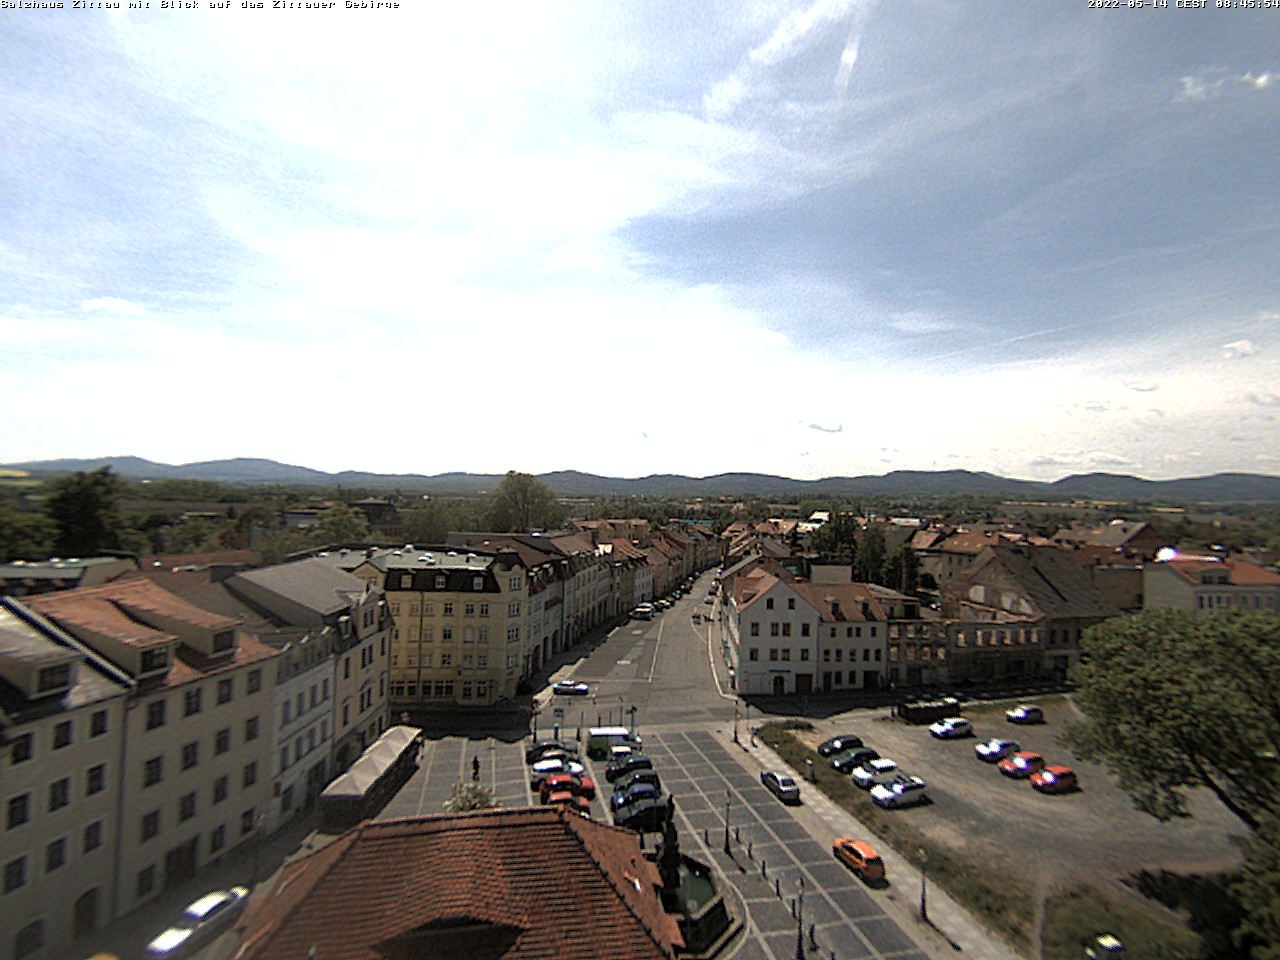 preview: live view in Zittau